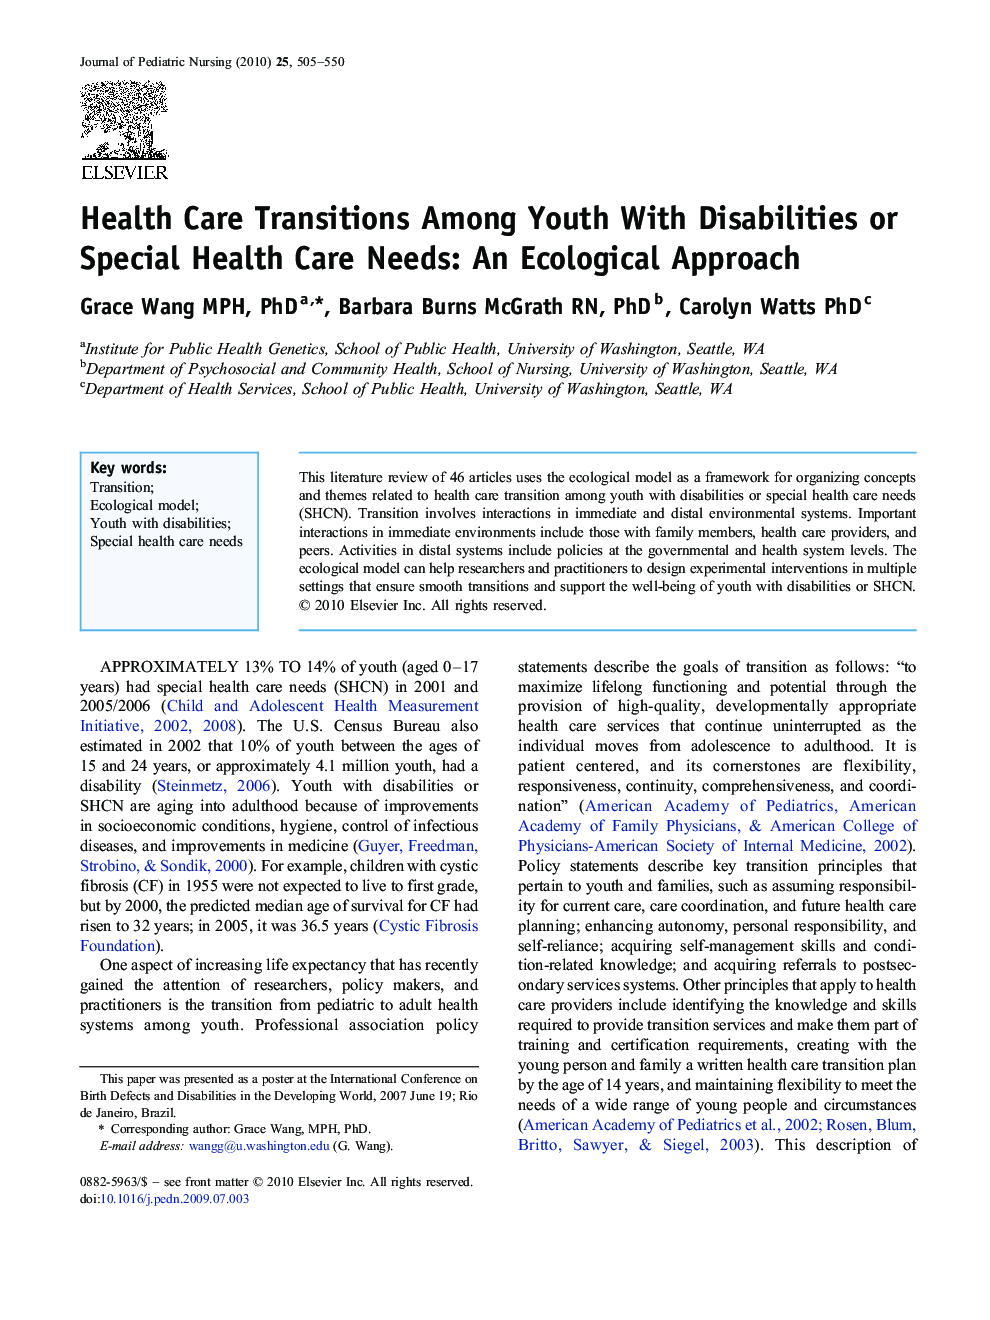 Health Care Transitions Among Youth With Disabilities or Special Health Care Needs: An Ecological Approach 